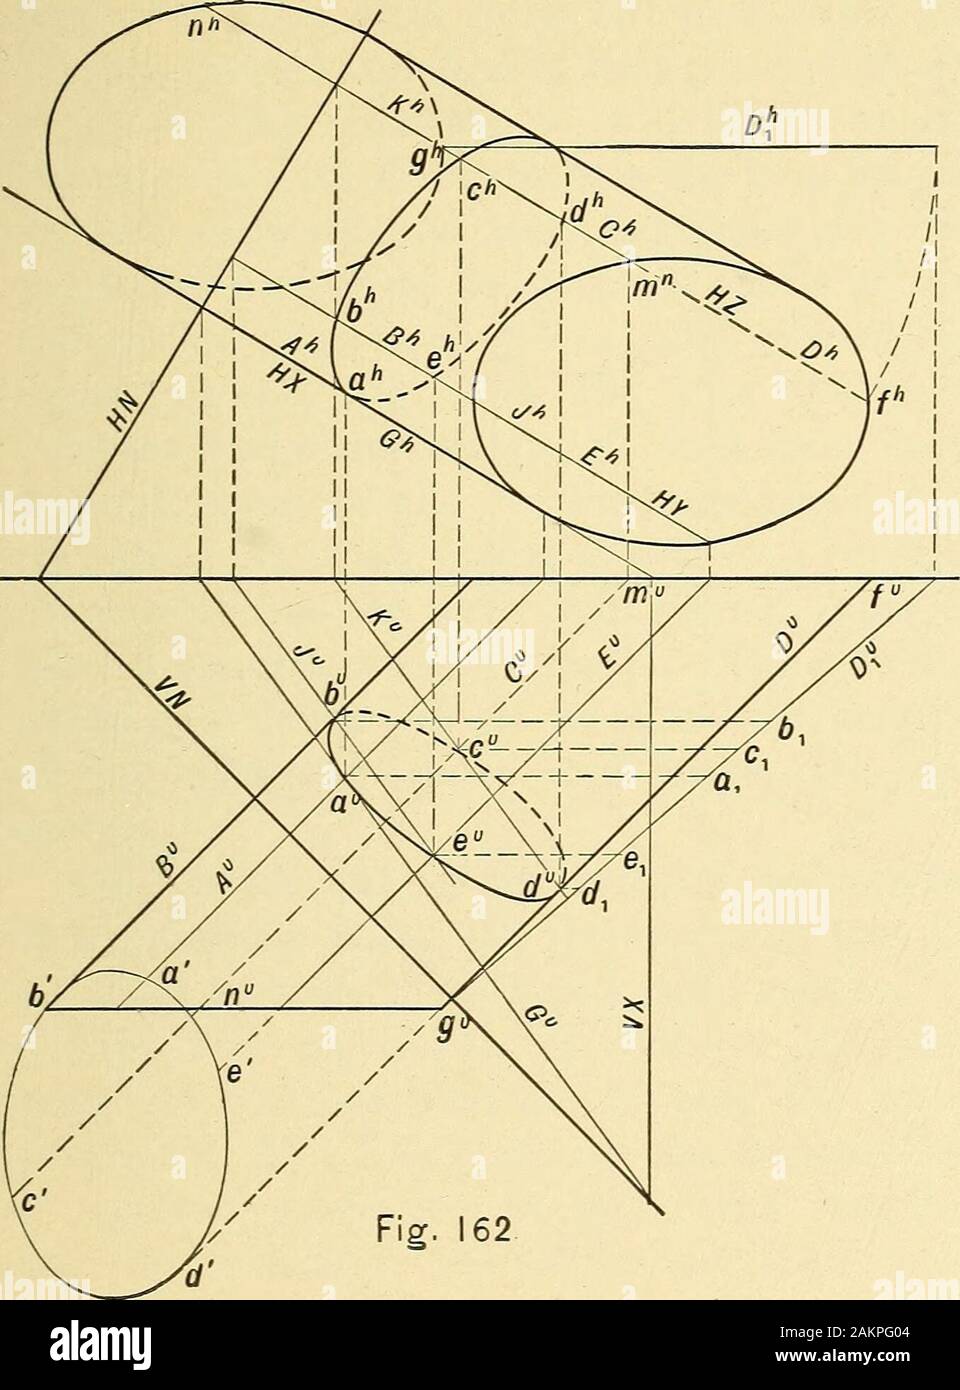 Descriptive geometry . lement, A^and intersects the given plane in the line Gr.Since lines 6r and A lie in plane X, they in-tersect in a, one point in the required curveof intersection between the cylinder and thegiven plane iV. Likewise plane Z intersectsthe cylinder in elements 0 and i&gt;, and theplane iV^in line K, the intersections of whichwith lines O and D are c and t?, two otherpoints in the required curve. The true size of the cut section has beendetermined by revolving it into V about F7Vas an axis. 125. To develop the cylinder. Principle. When a cylinder is rolled upona plane to det Stock Photo